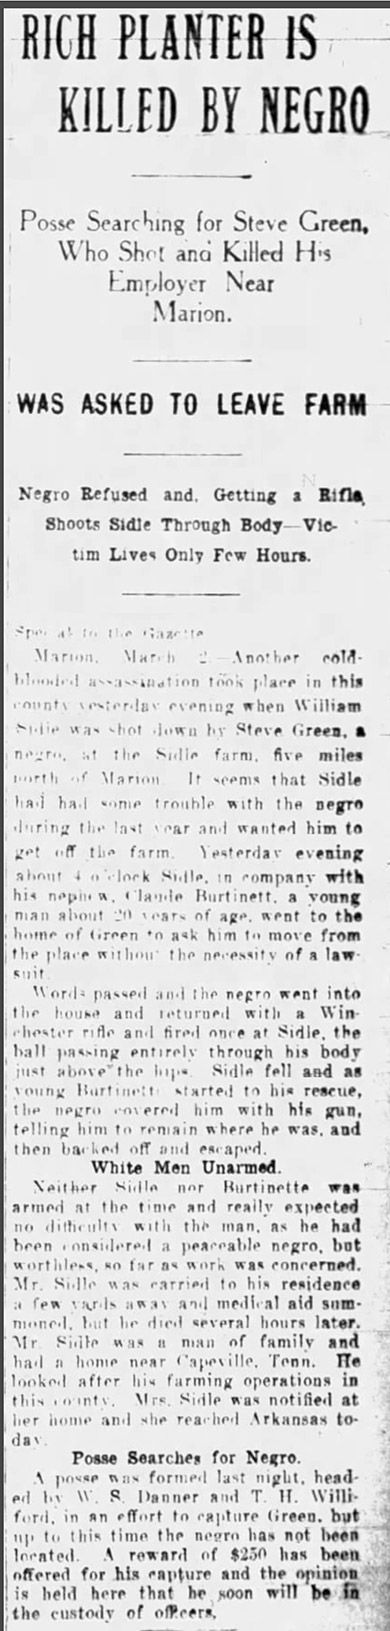 "Rich planter is killed by Negro" newspaper clipping